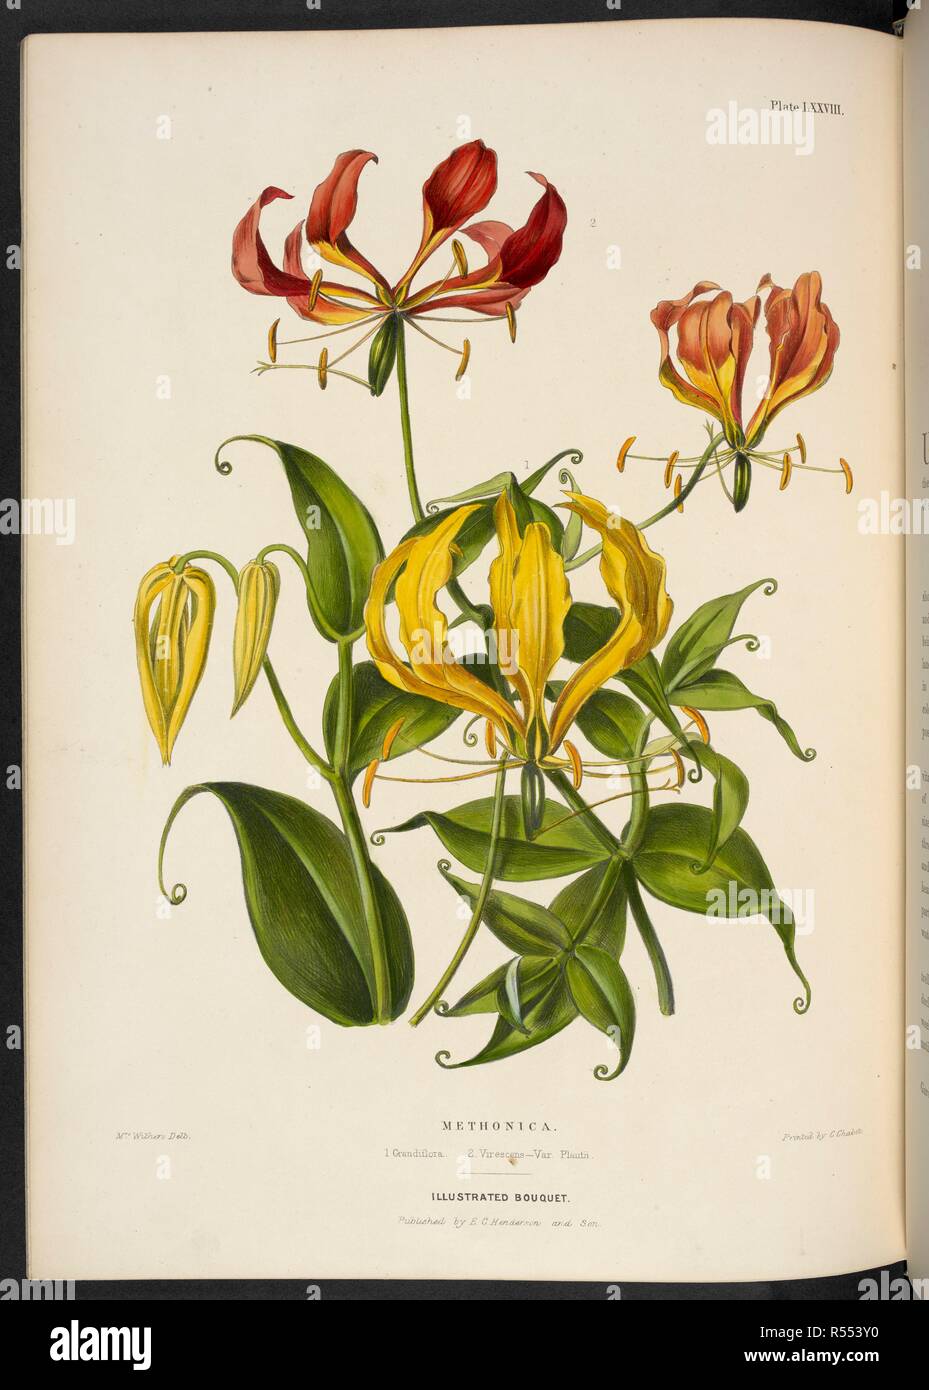 Methonica Grandiflora, etc. Methonica. 1. Grandiflora; 2. Virescens â€“ Var. Plantii. The Illustrated Bouquet, consisting of figures, with descriptions of new flowers. London, 1857-64. Source: 1823.c.13 plate 78. Author: Henderson, Edward George. Withers, Mrs. Stock Photo